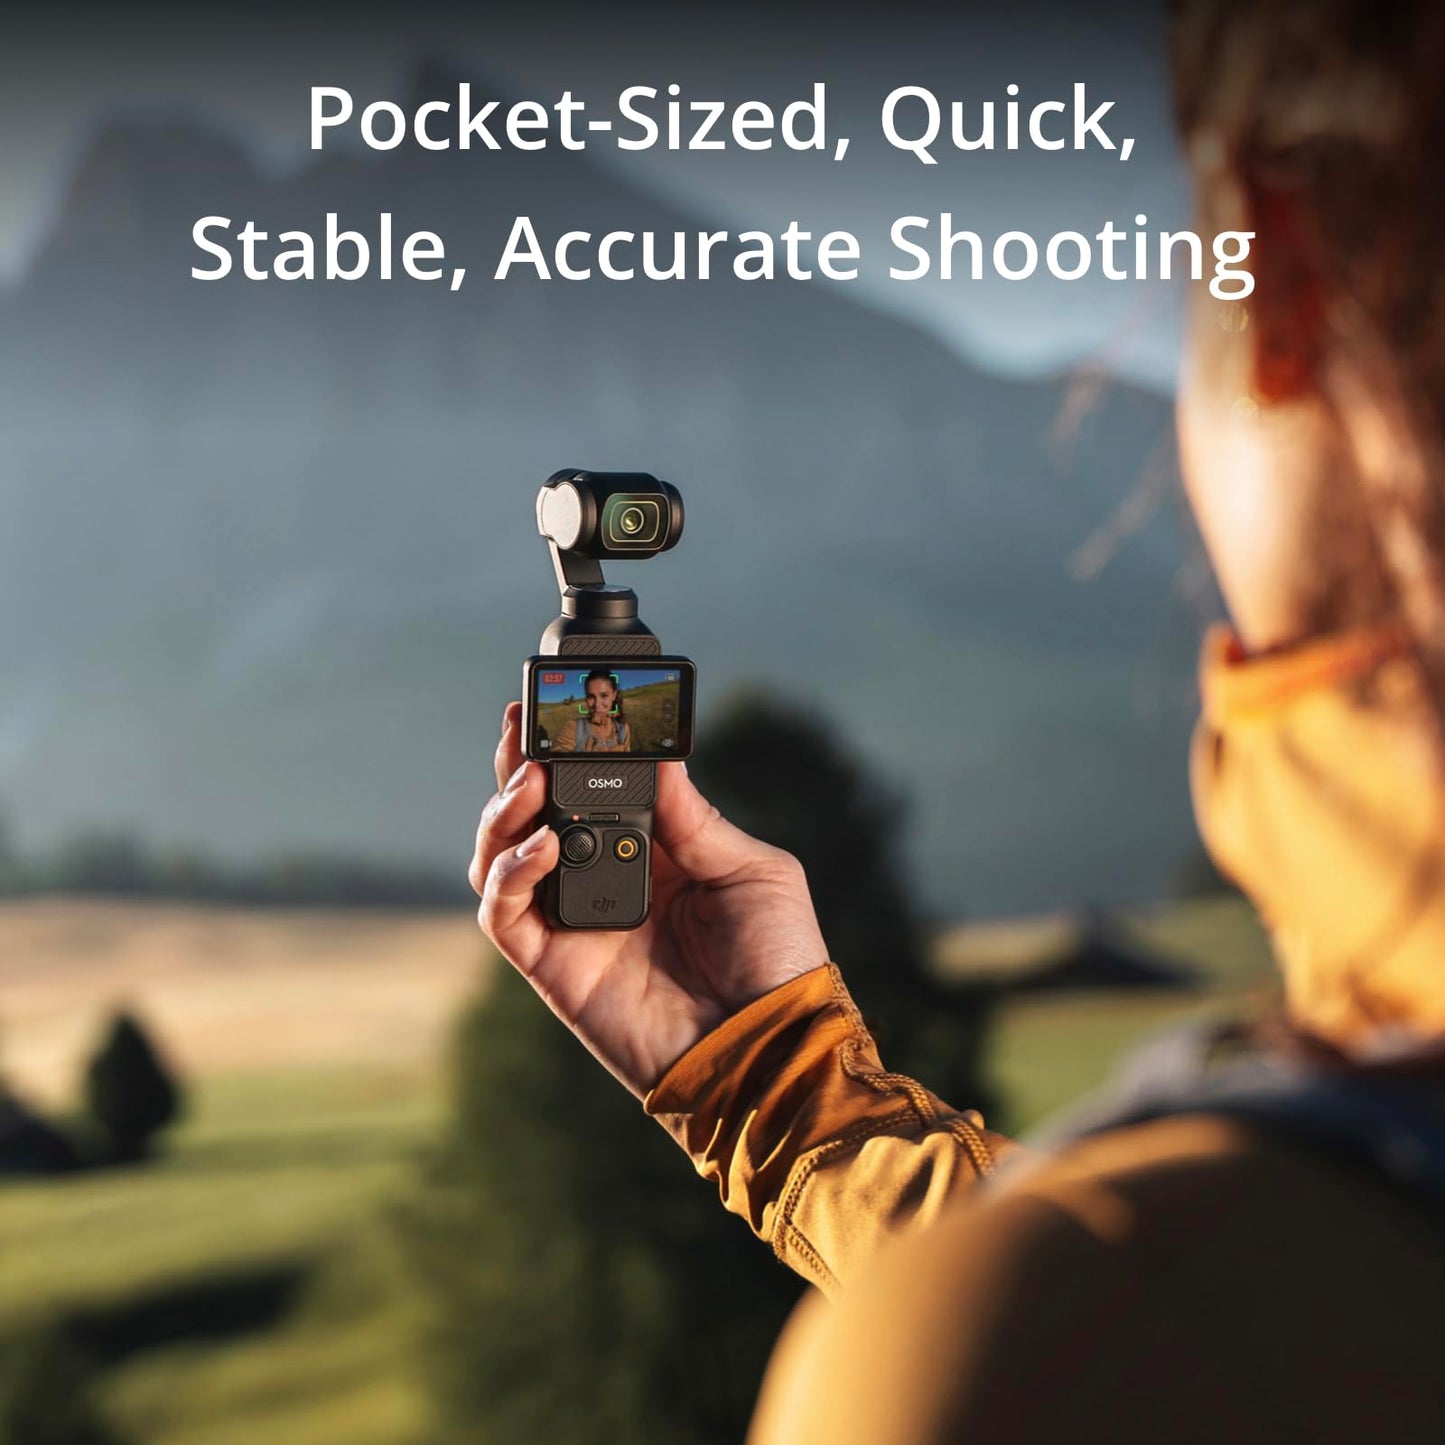 DJI Osmo Pocket 3, 4K/120fps Vlogging Camera, 1'' CMOS, 3-Axis Stabilization, Fast Focus, Face/Object Tracking, 2" Touchscreen - Ideal for YouTube & Photography